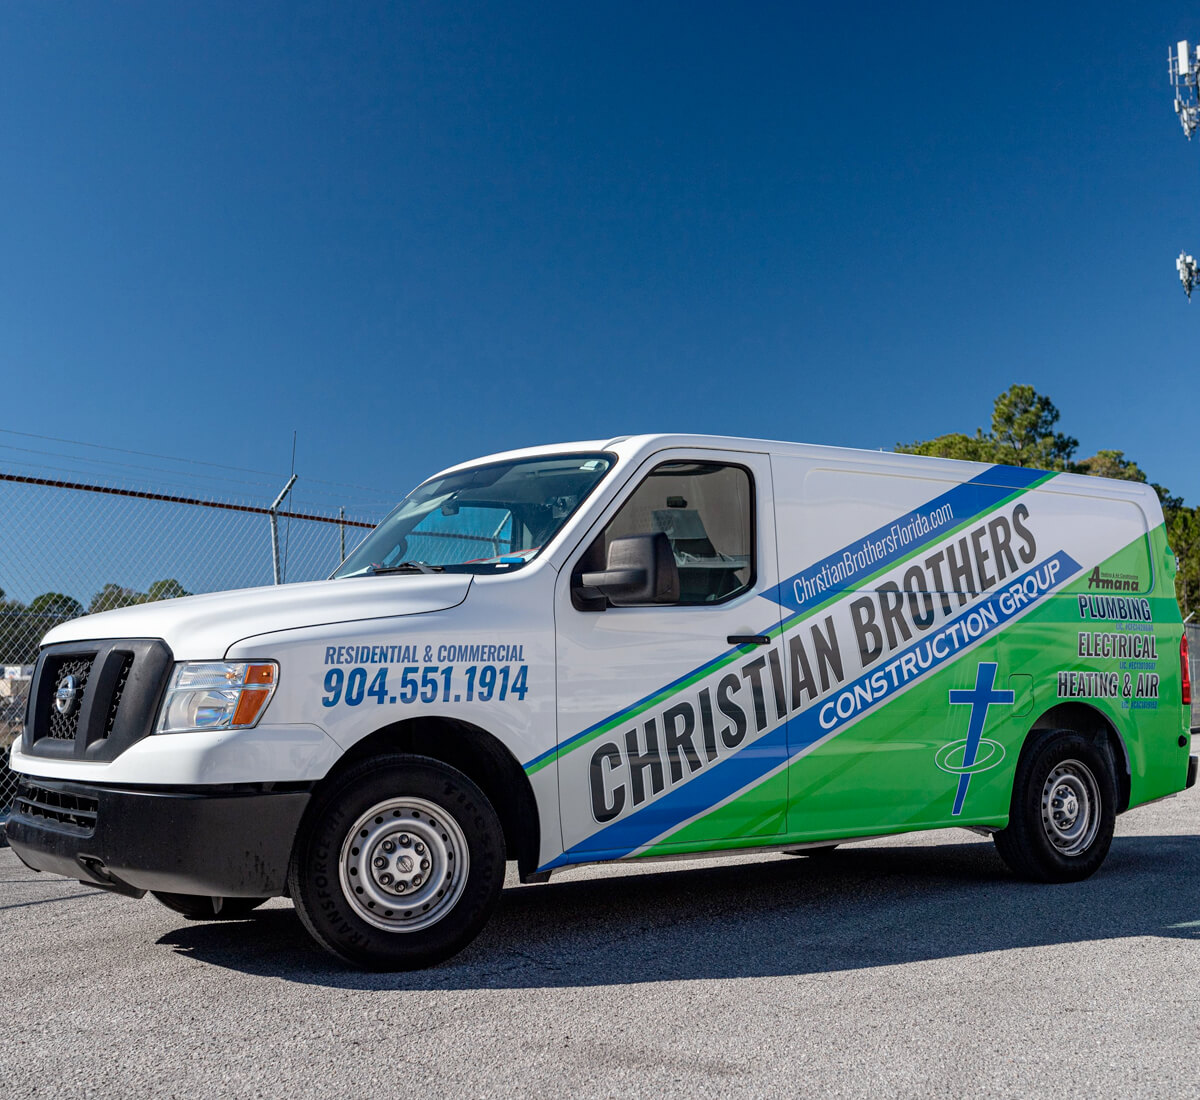 White Nissan van with a construction group business logo